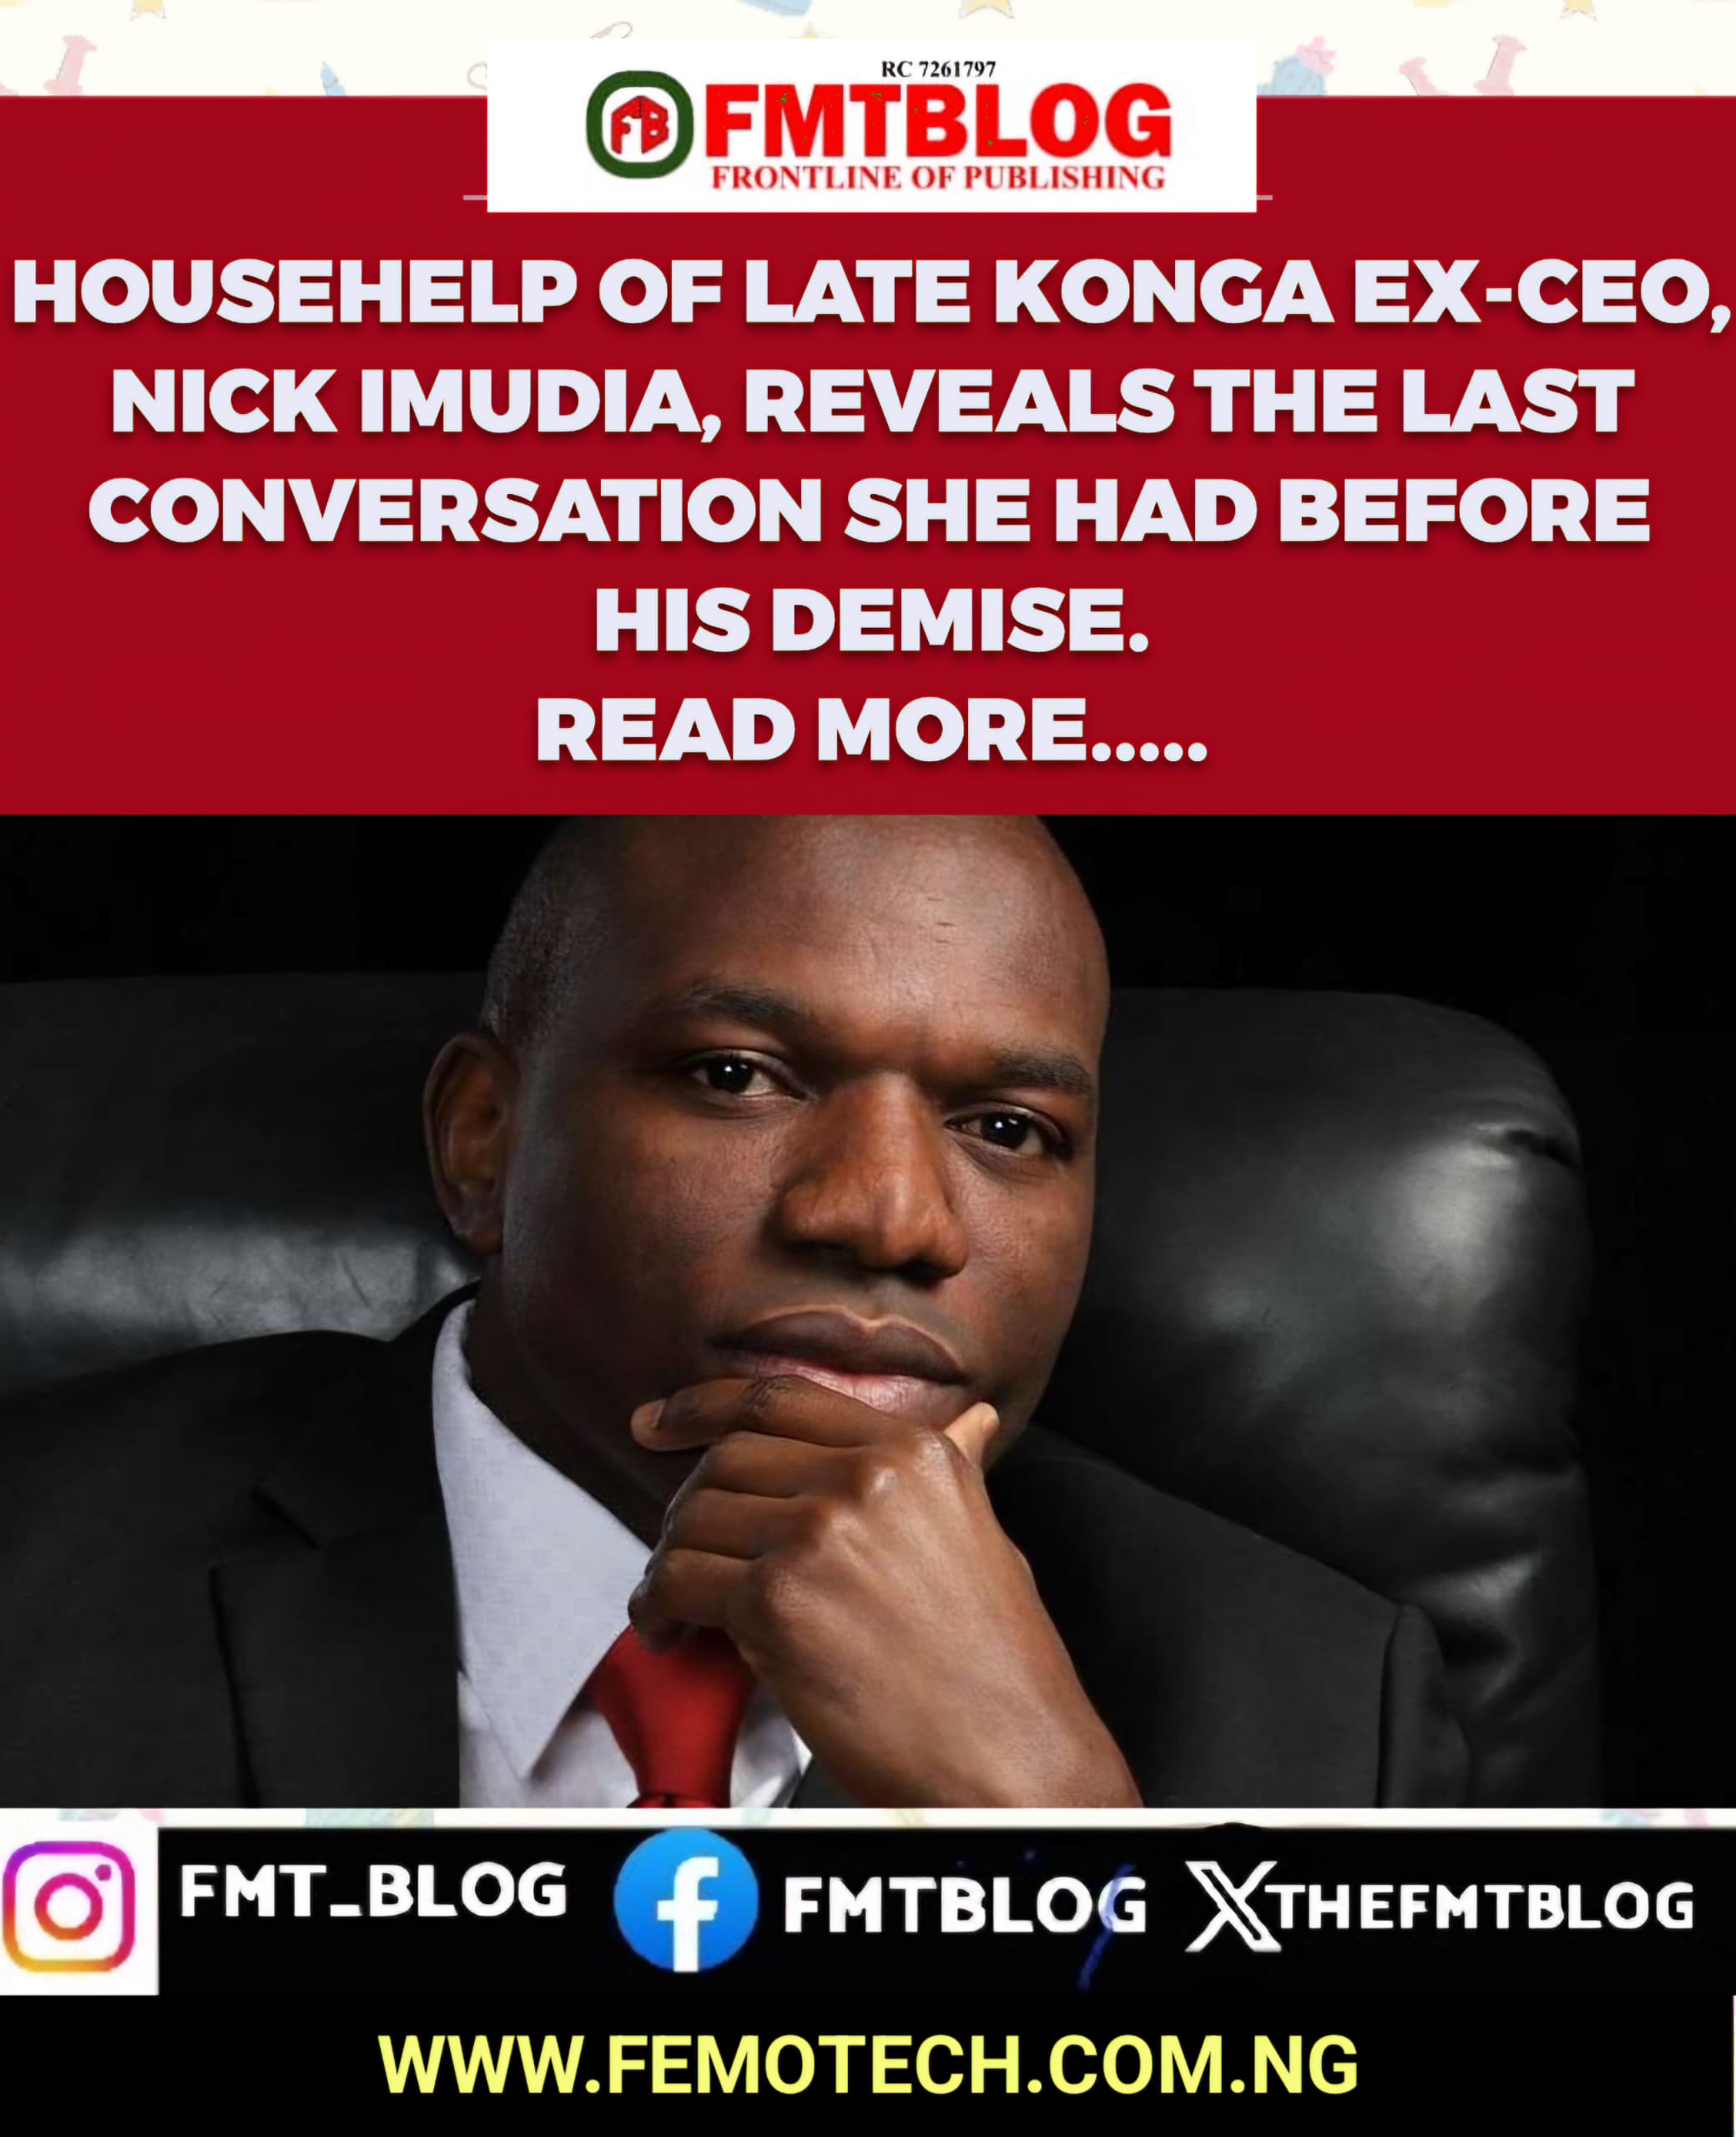 Househelp Of Late Konga Ex-CEO, Nick Imudia, Reveals The Last Conversation She Had Before His Demise